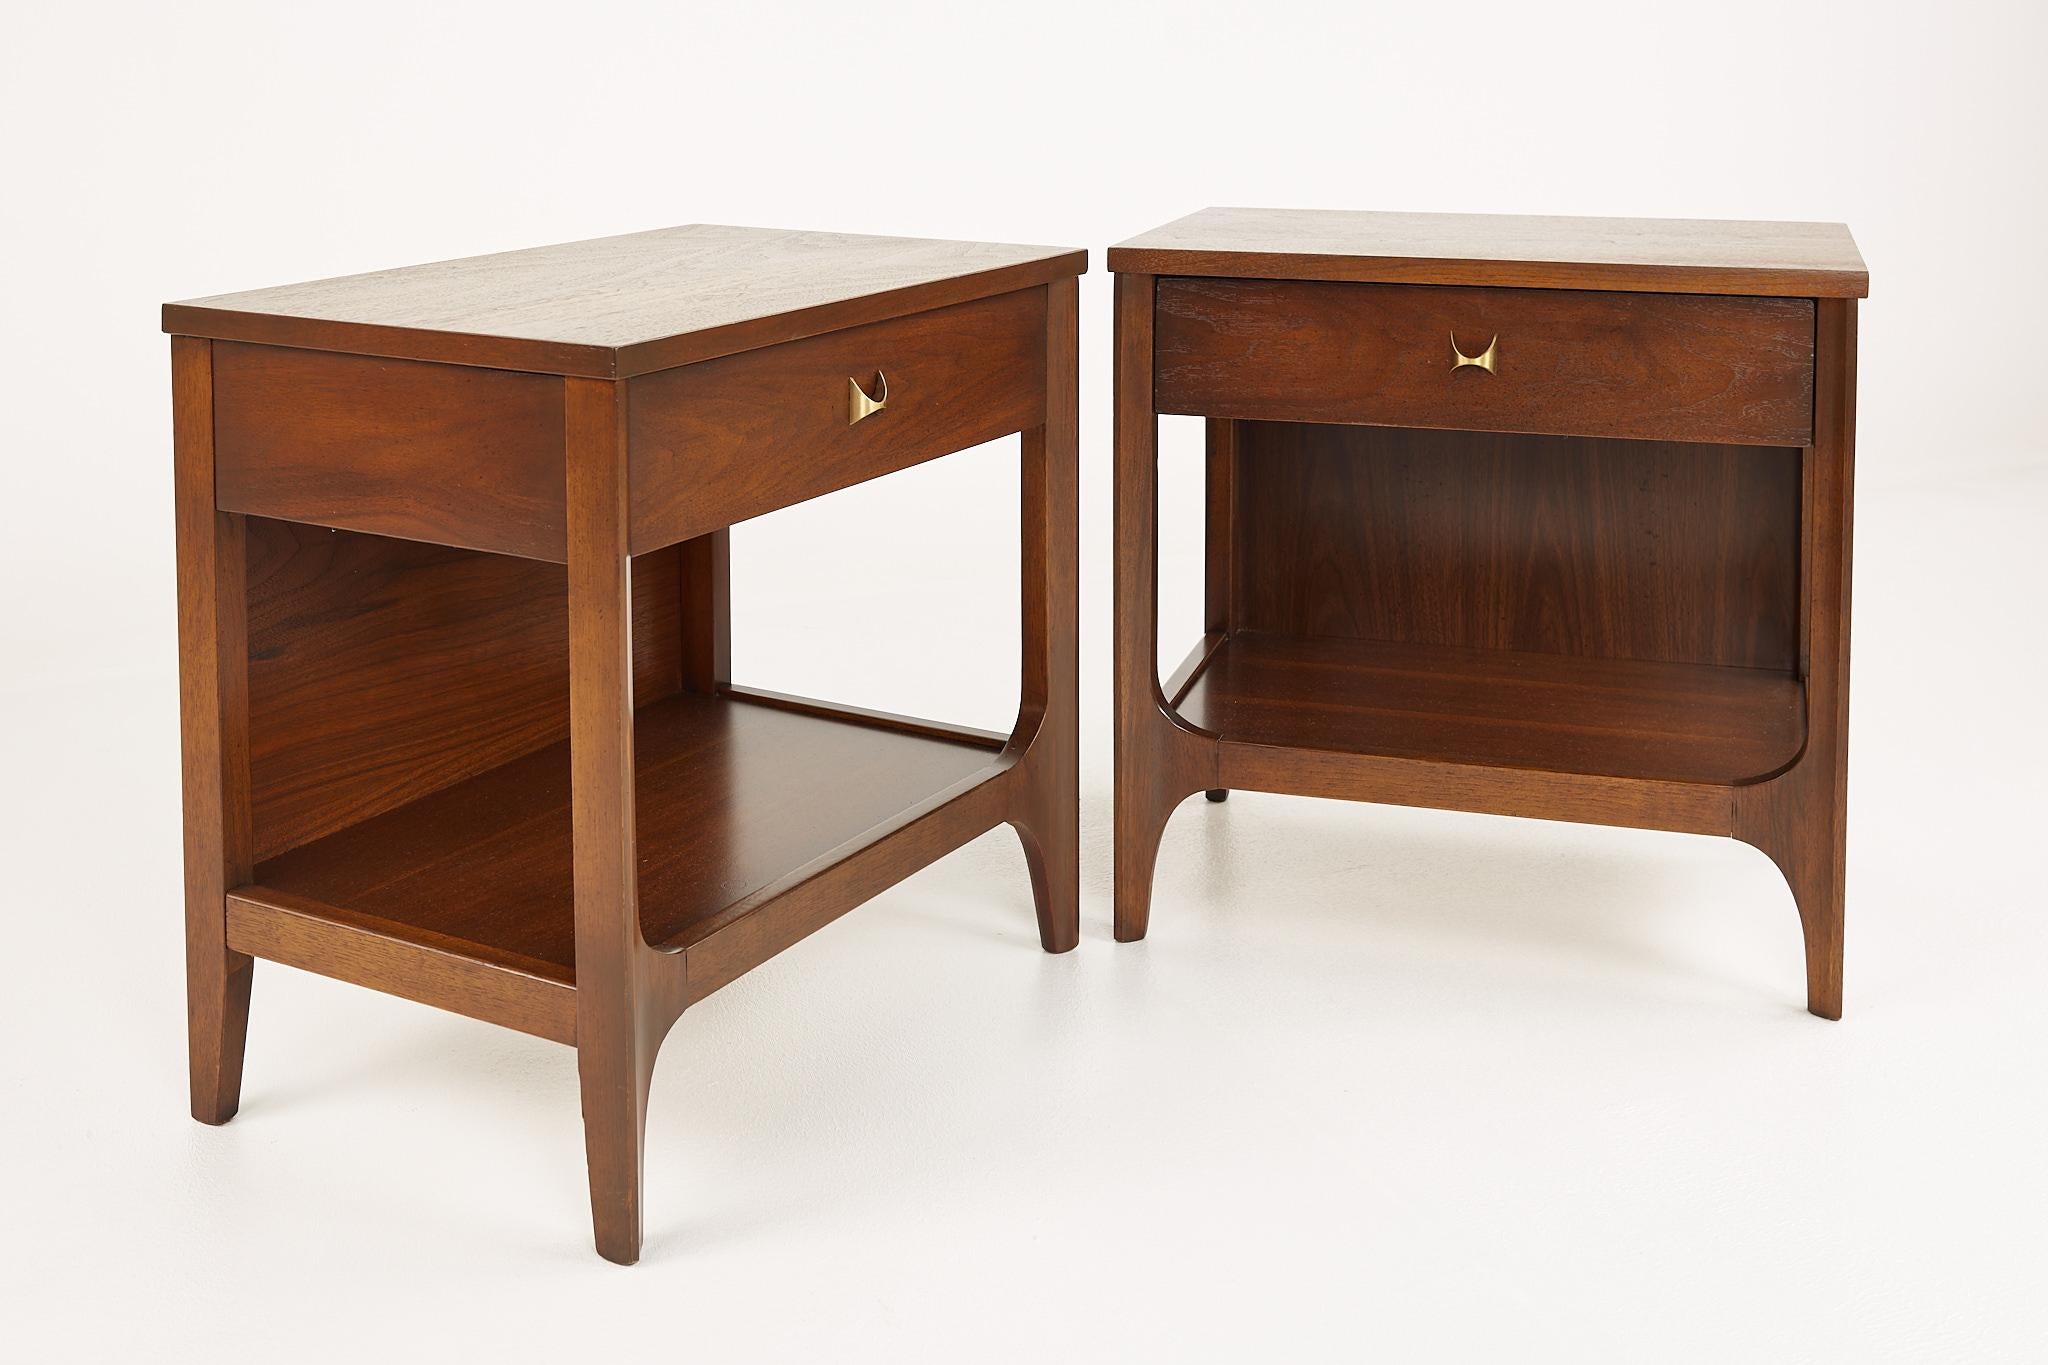 Broyhill Brasilia Mid Century Walnut Nightstand - Pair

Each nightstand measures: 22.25 wide x 15 deep x 22 inches high

All pieces of furniture can be had in what we call restored vintage condition. That means the piece is restored upon